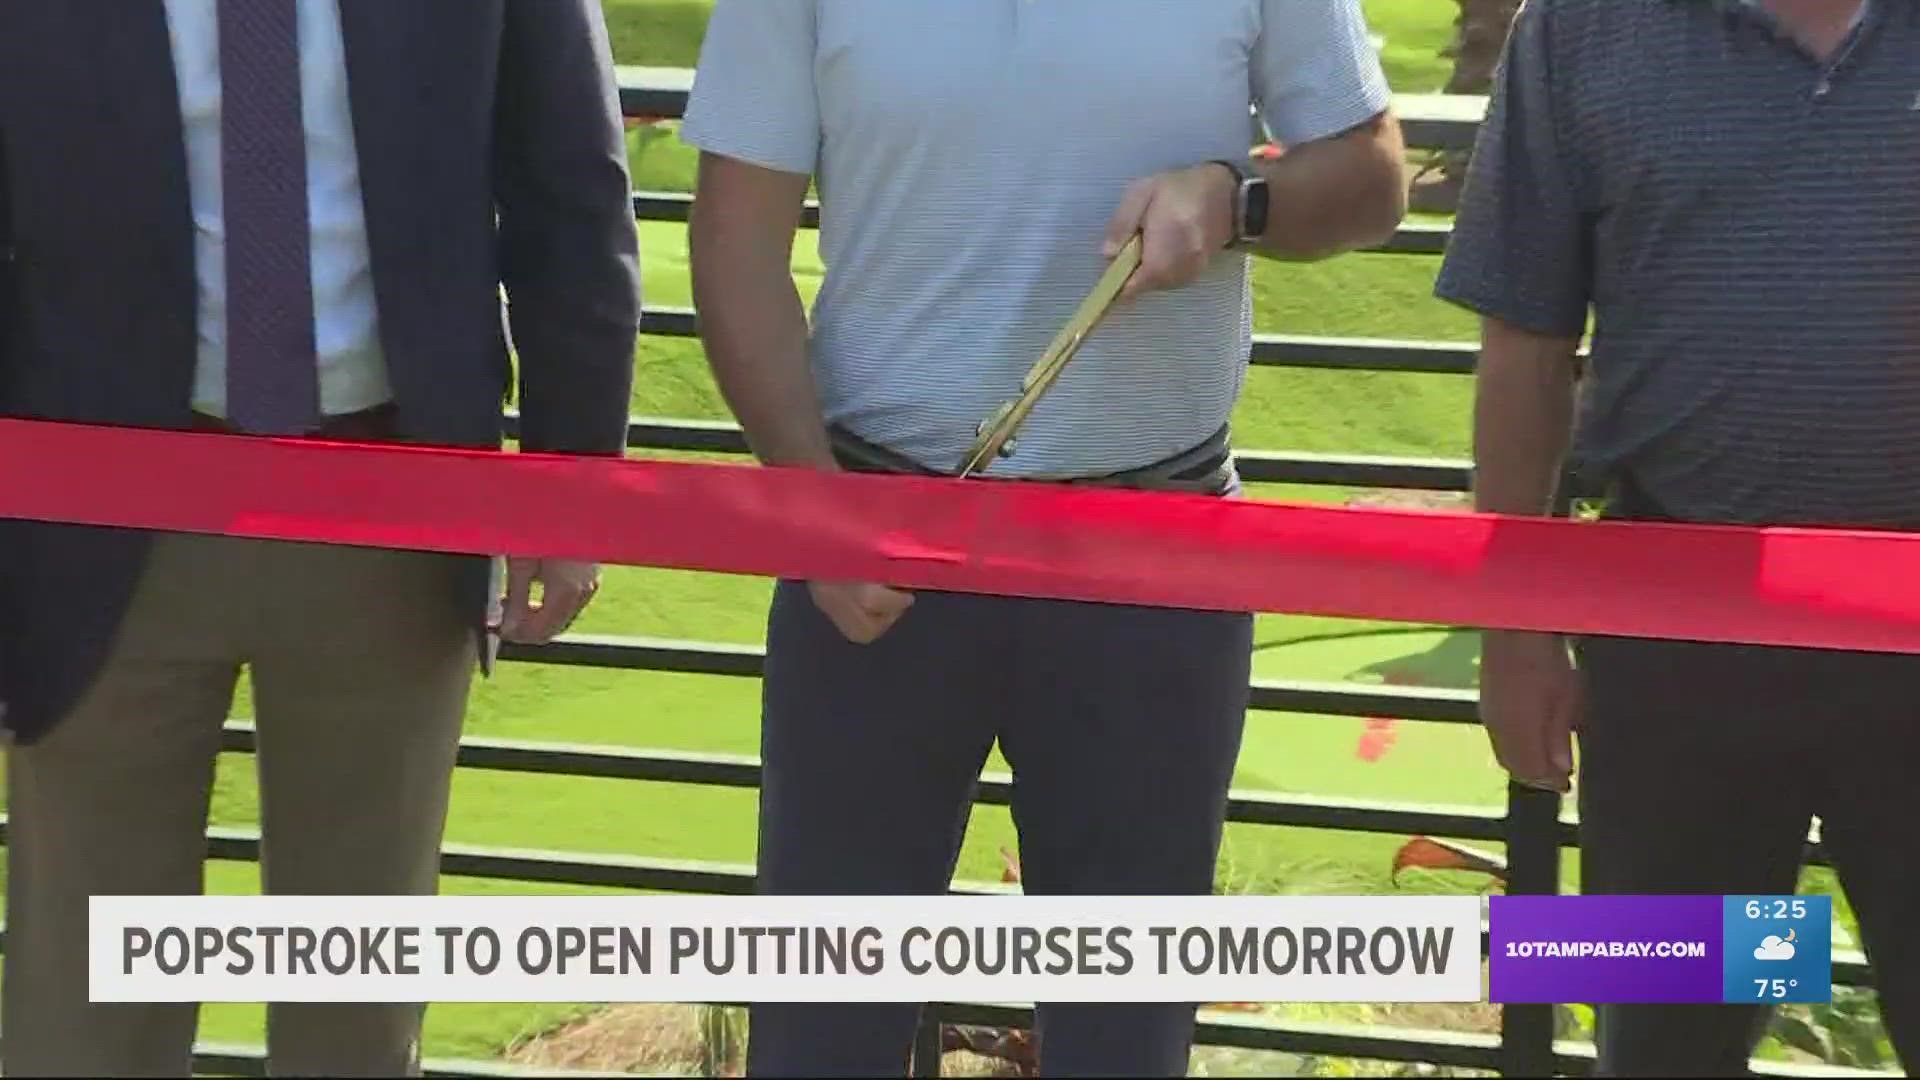 The 18-hole putting course, located off of Sierra Center Blvd. in in the Cypress Creek Town Center, will officially open its doors at 11 a.m. on Friday.